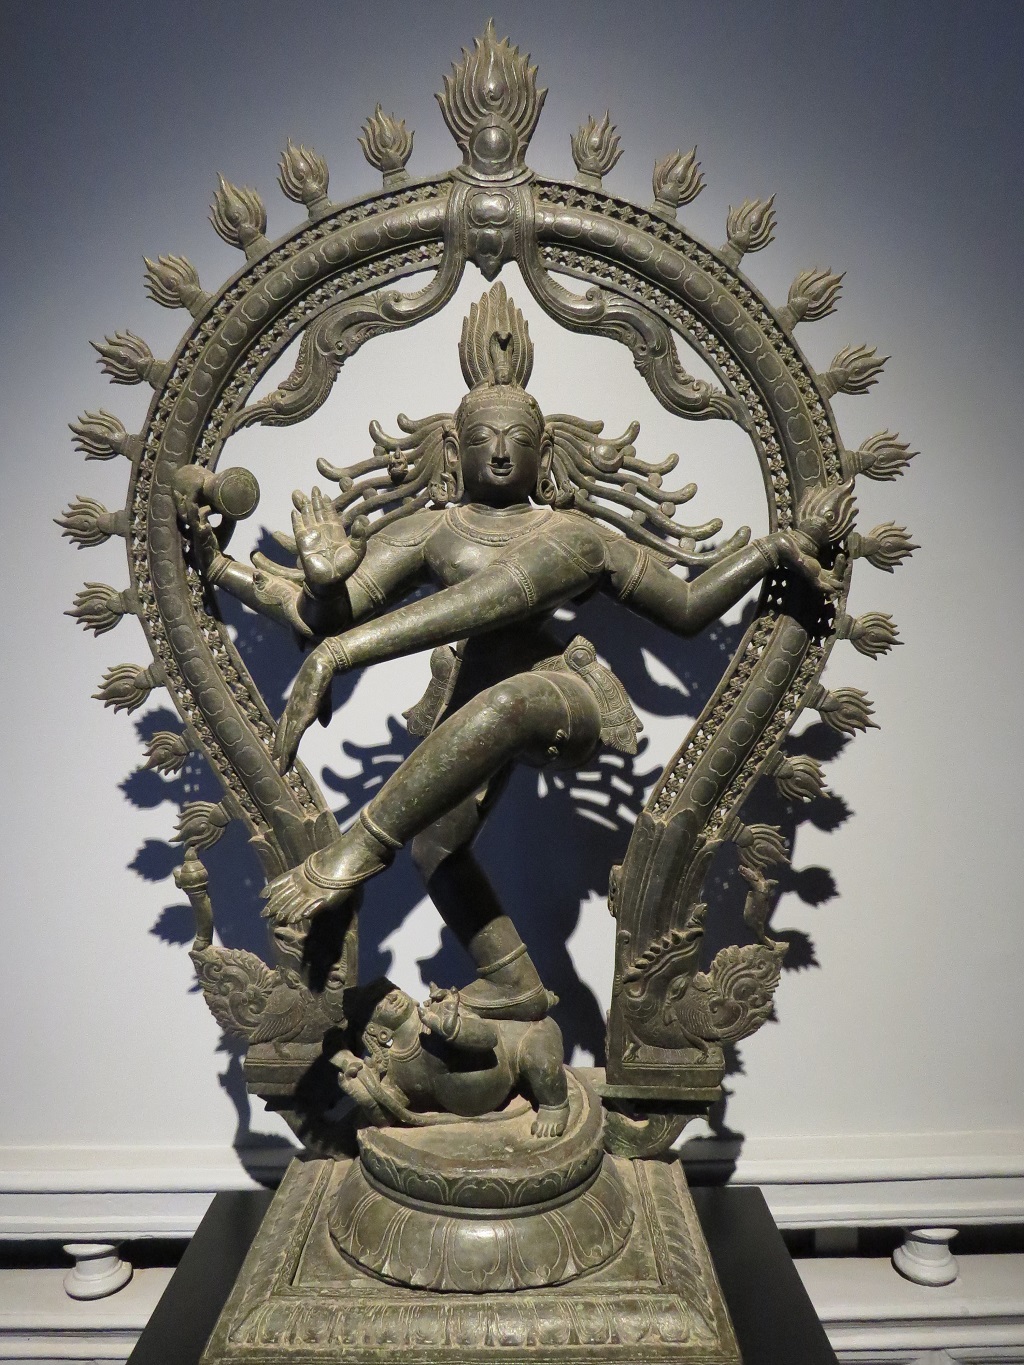 About: Nataraja – The Lord of the Dance